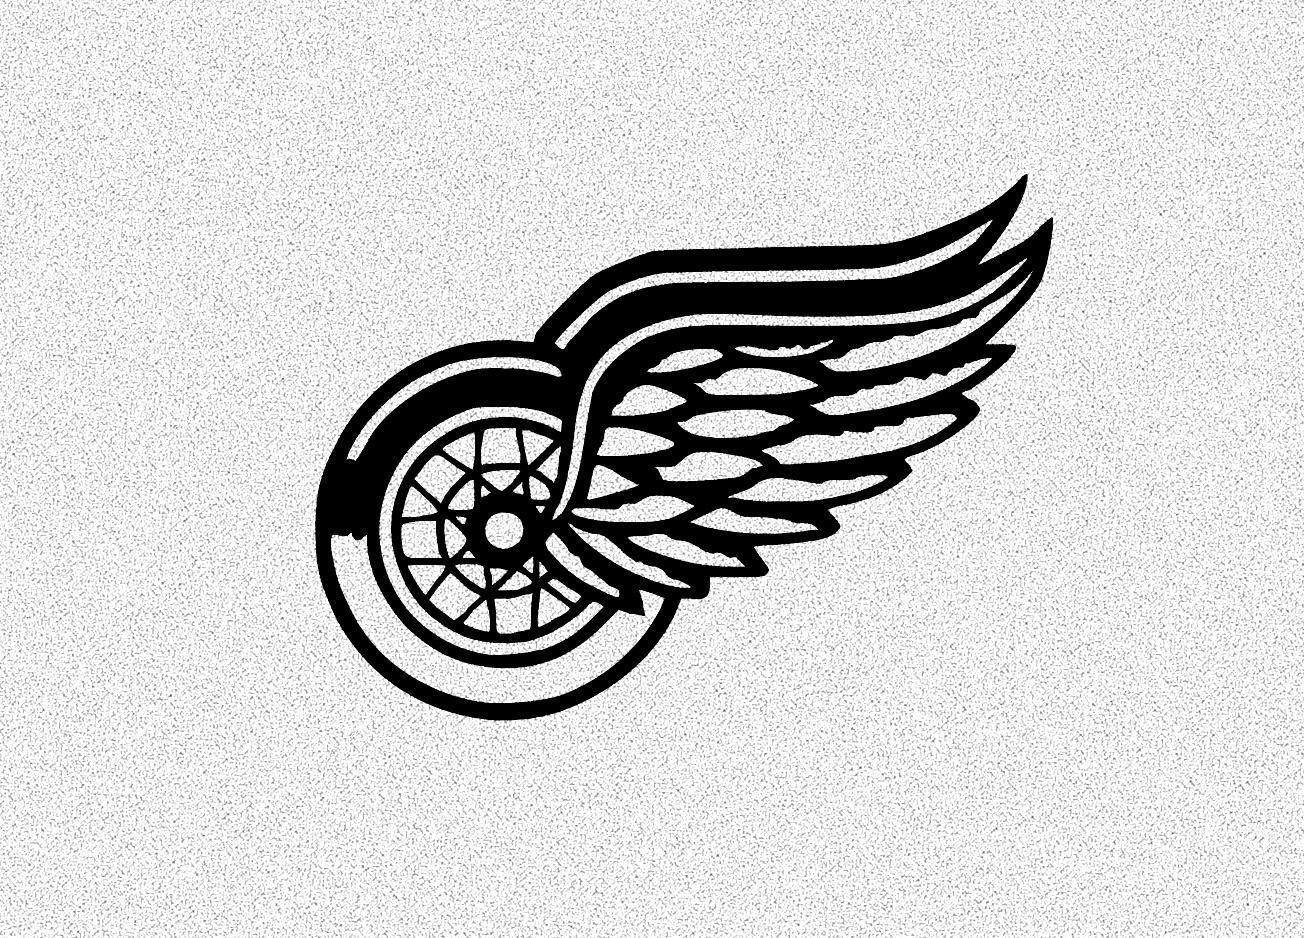 White Picture of Red Wing Logo - Pin by Kathy Cicero on Decals | Pinterest | Decals, Vinyl decals and ...